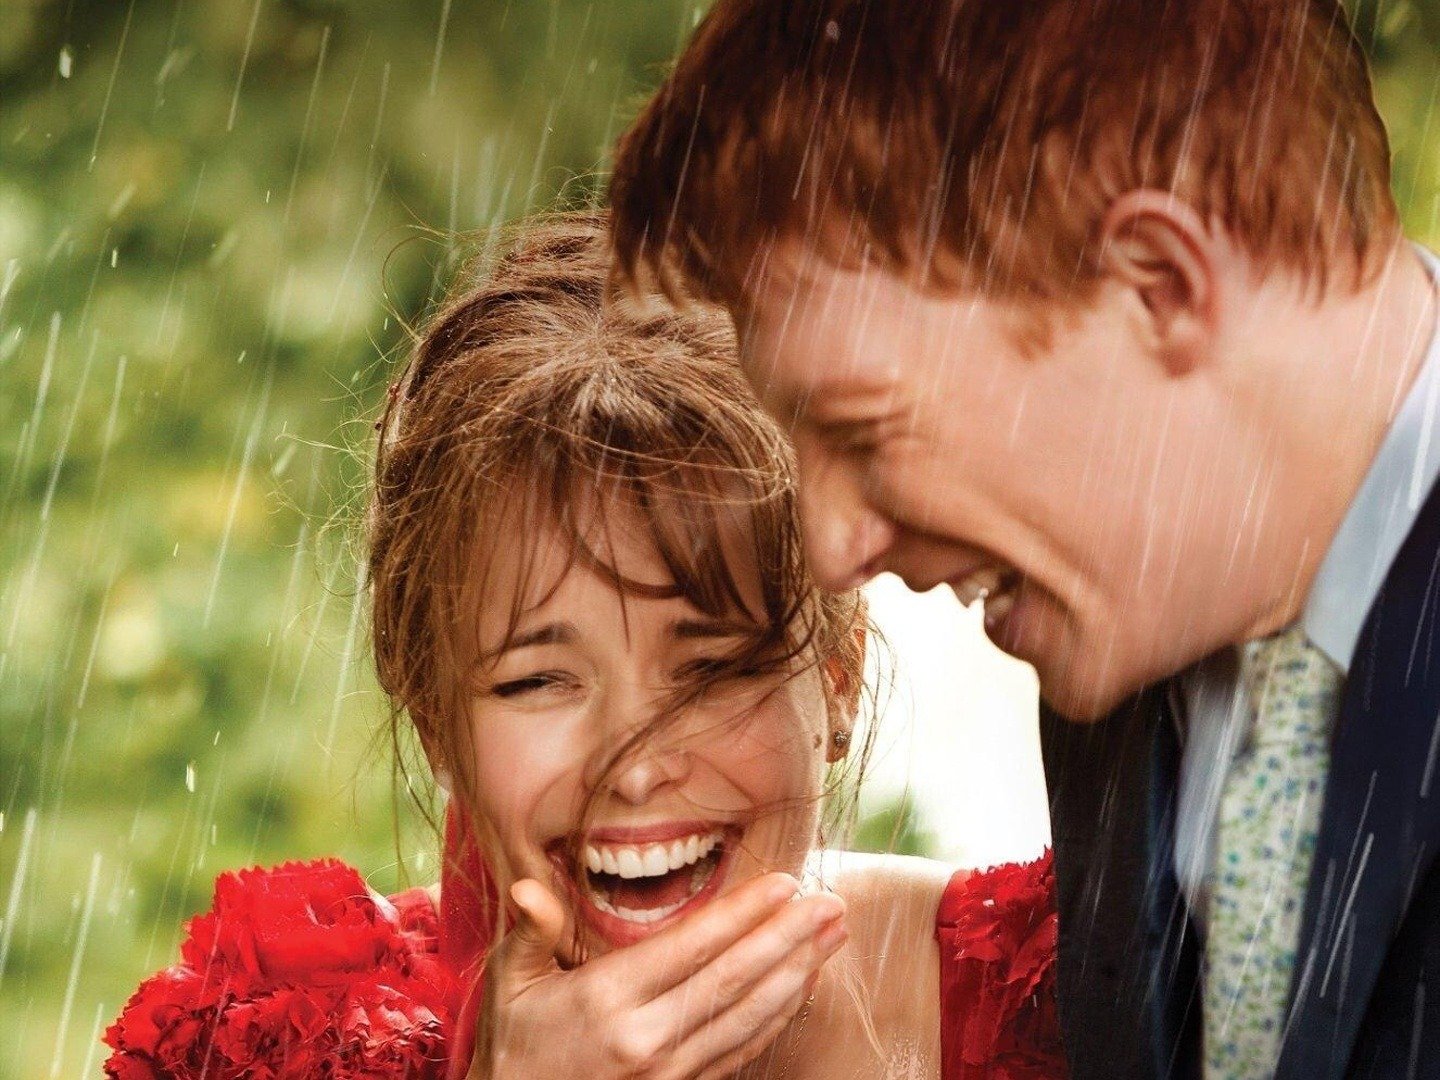 About Time: Official Clip - Live Every Day Twice - Trailers & Videos ...